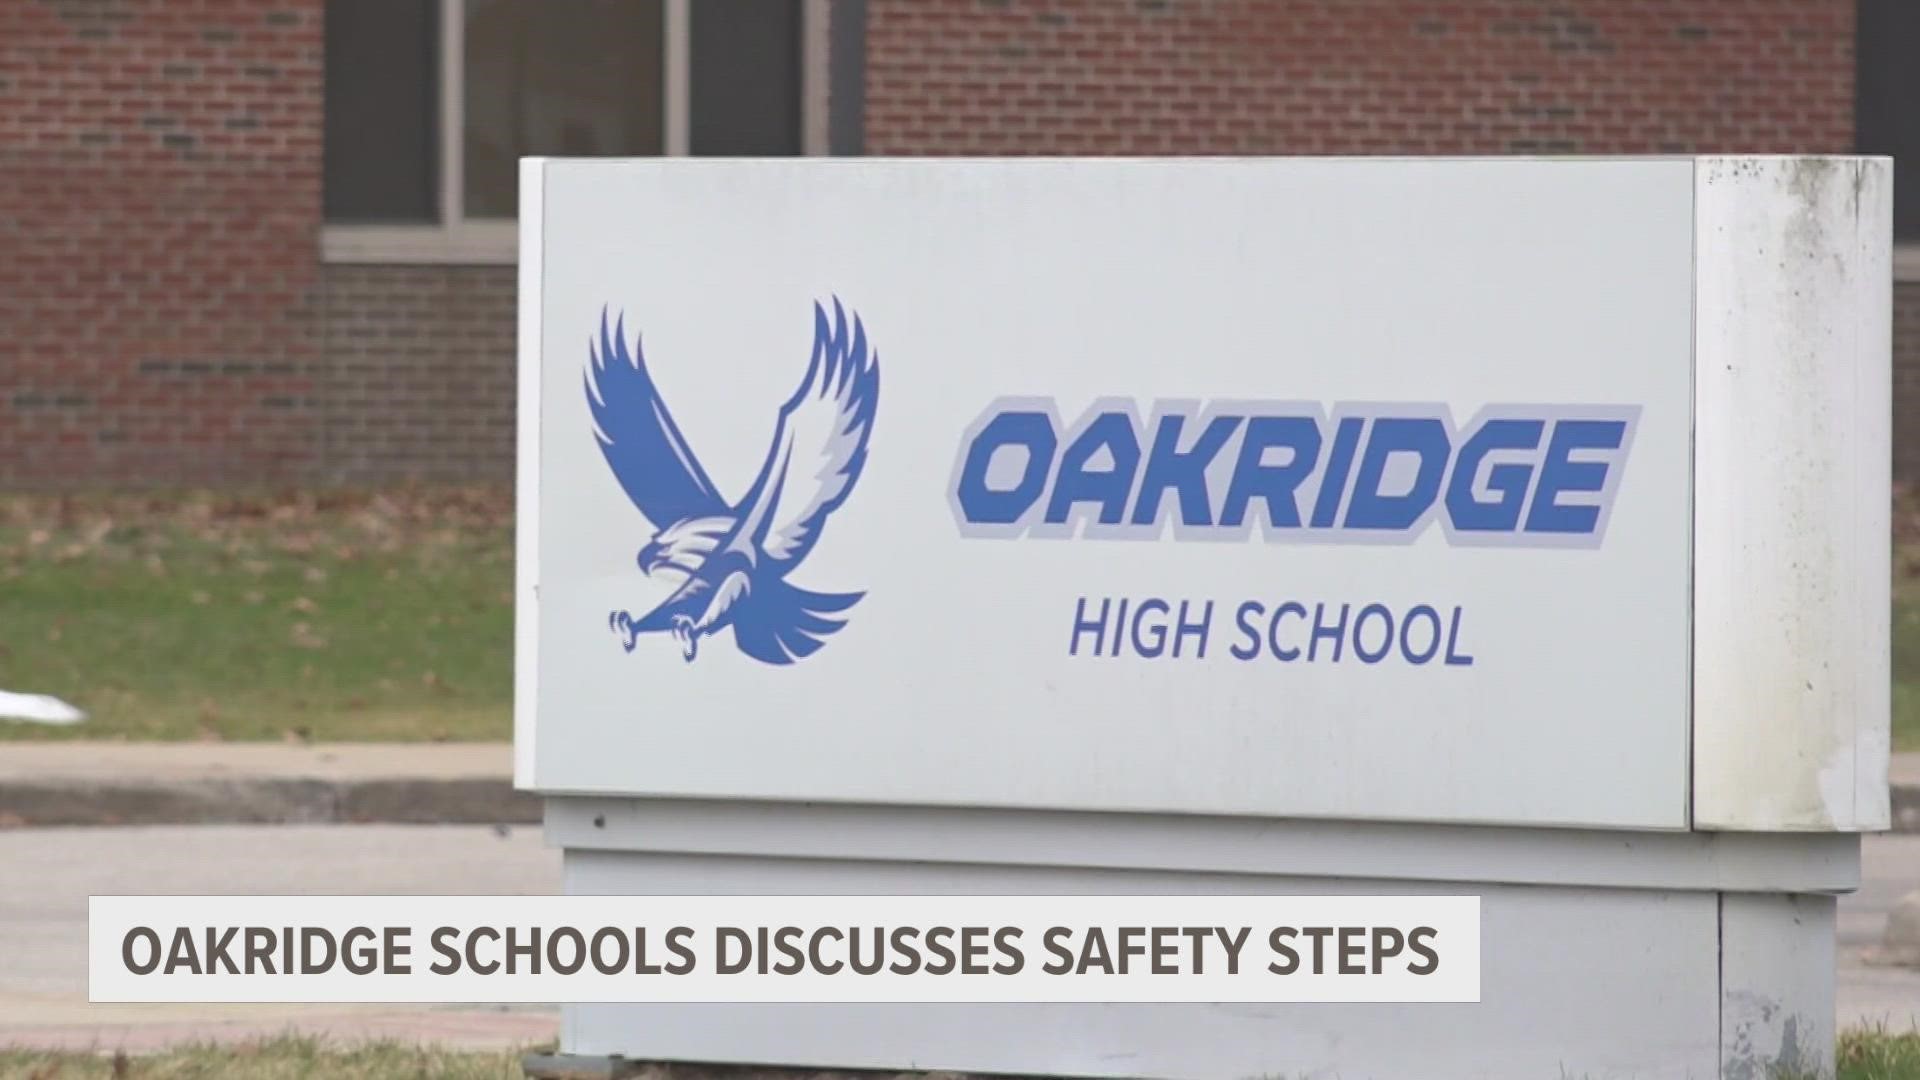 Oakridge recently hired Curt Theune, a retired 25+ year law enforcement officer to oversee school safety.